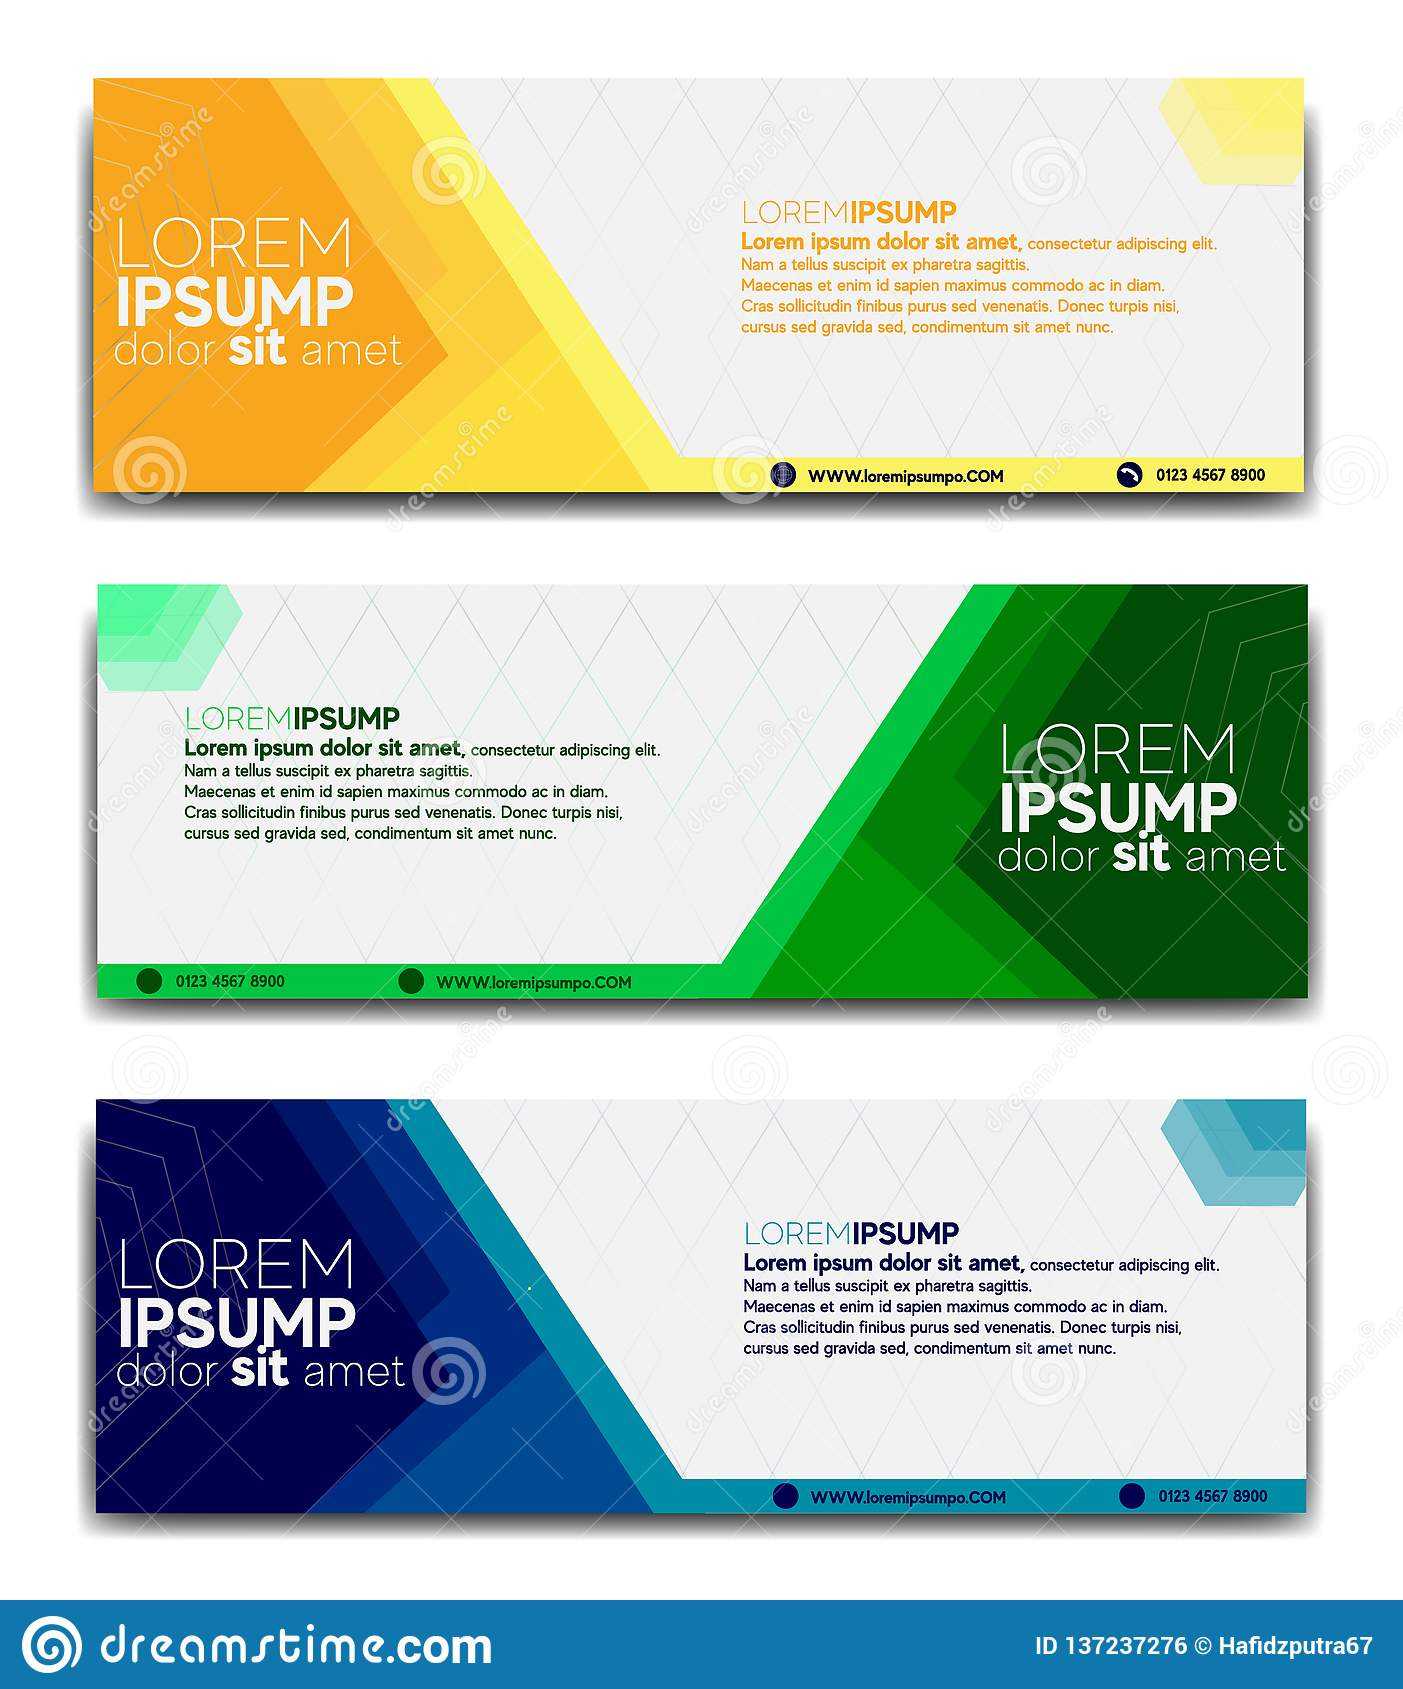 Promotional Banner Design Template 2019 Stock Vector Pertaining To Website Banner Design Templates